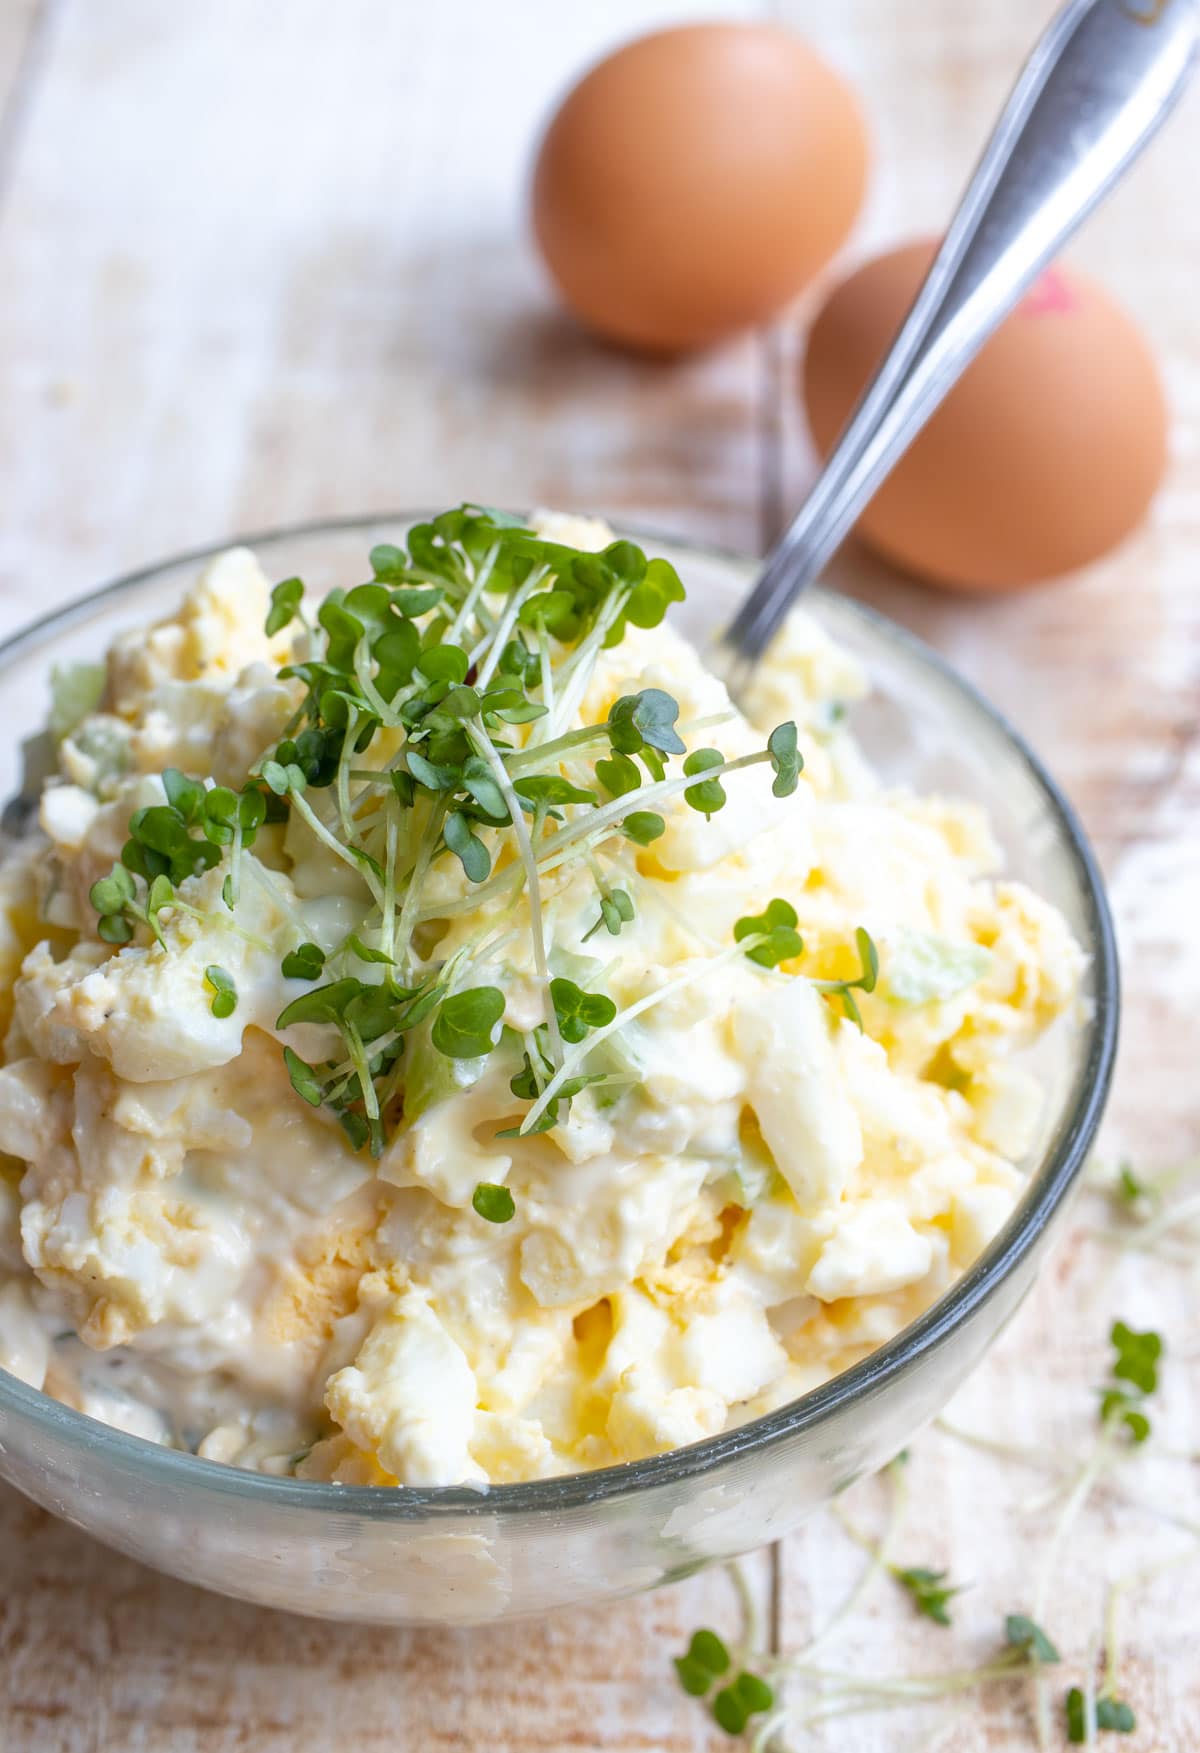 A bowl with egg salad.